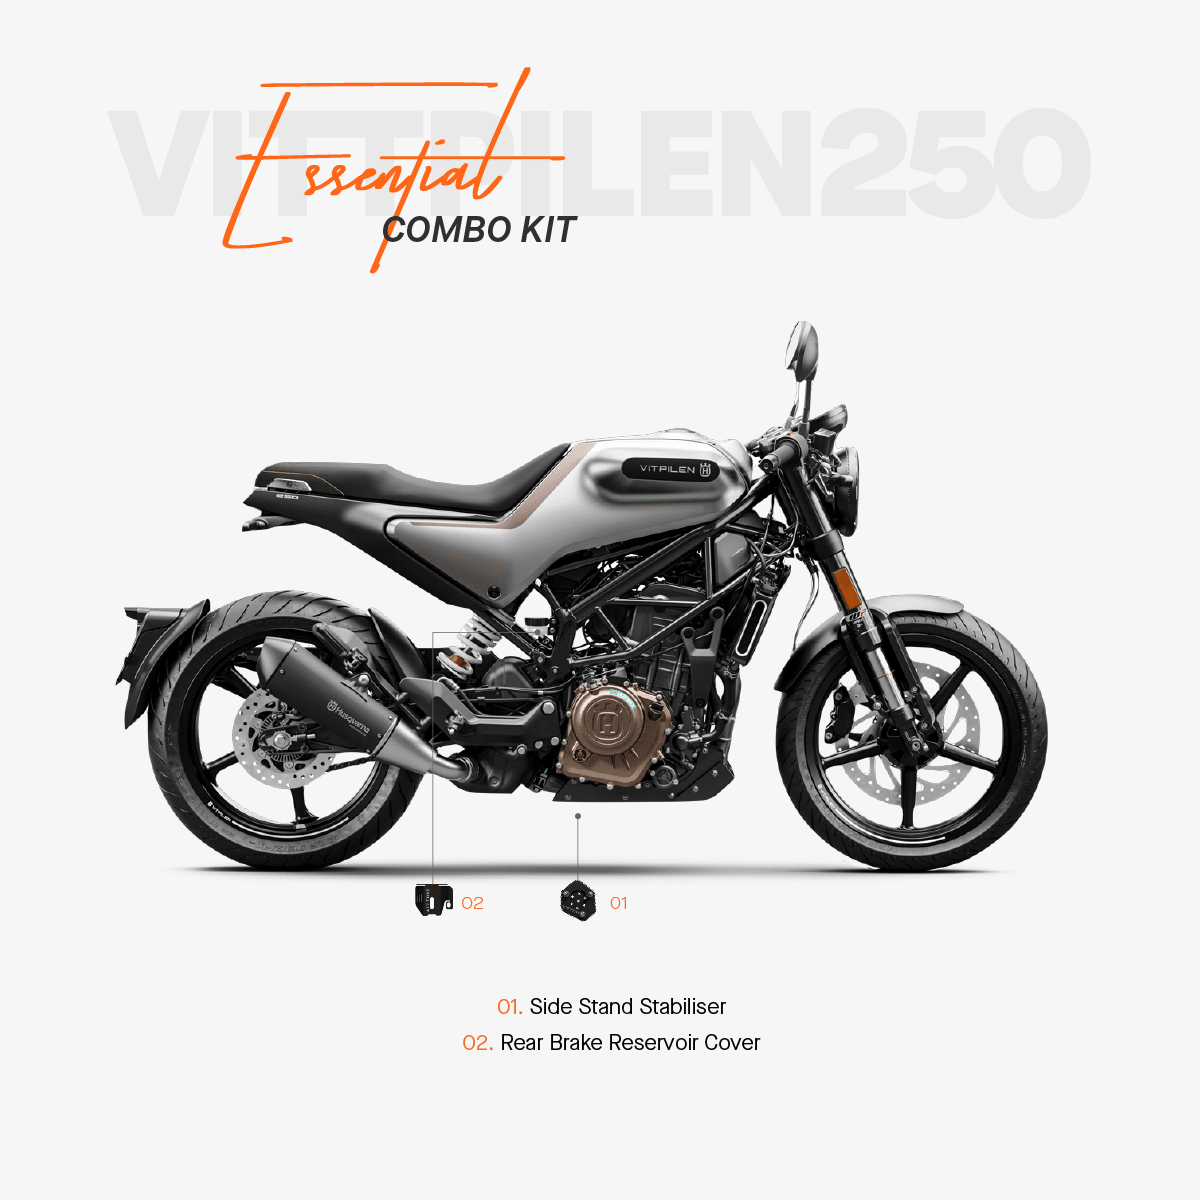 The Essential Combo Kit of 2 Accessories for Vitpilen 250